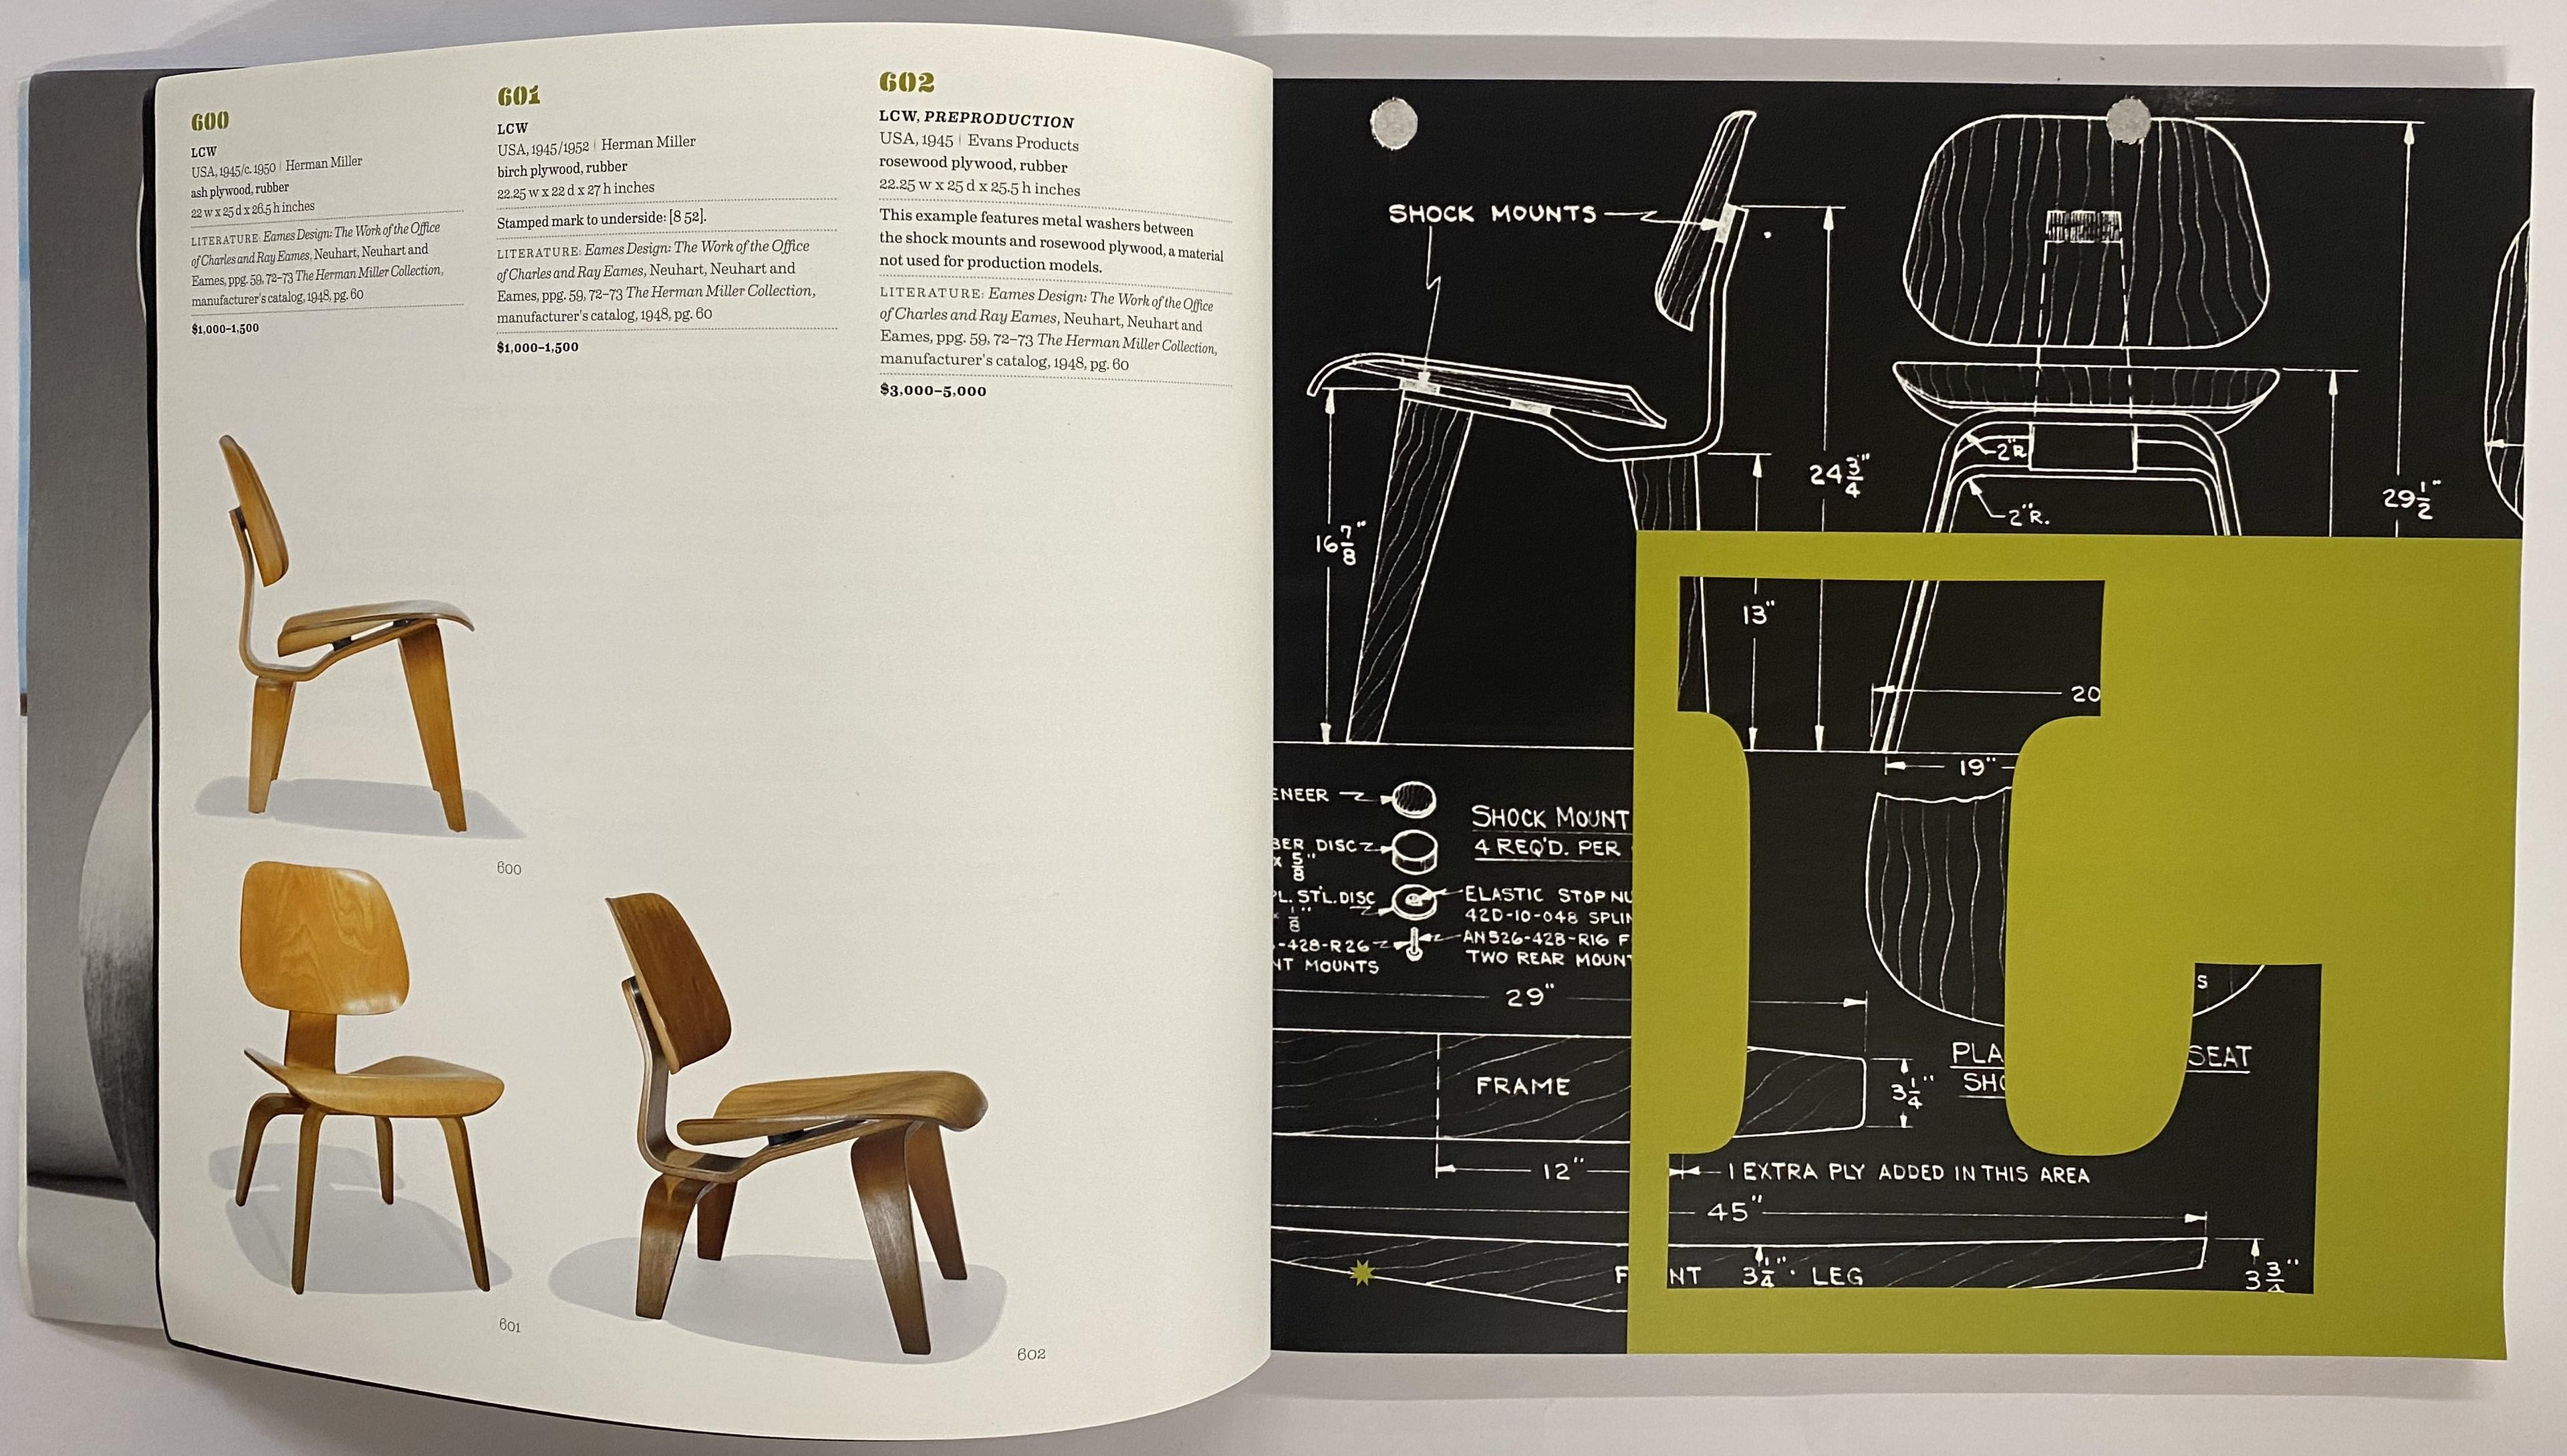 The catalogue was produced to market Wright's Eames design auction on April 8, 2010. The catalogue captures the spirit of playfulness for which the Eames are renowned. Integrating House Industries' Eames Century Modern font family, and the historic